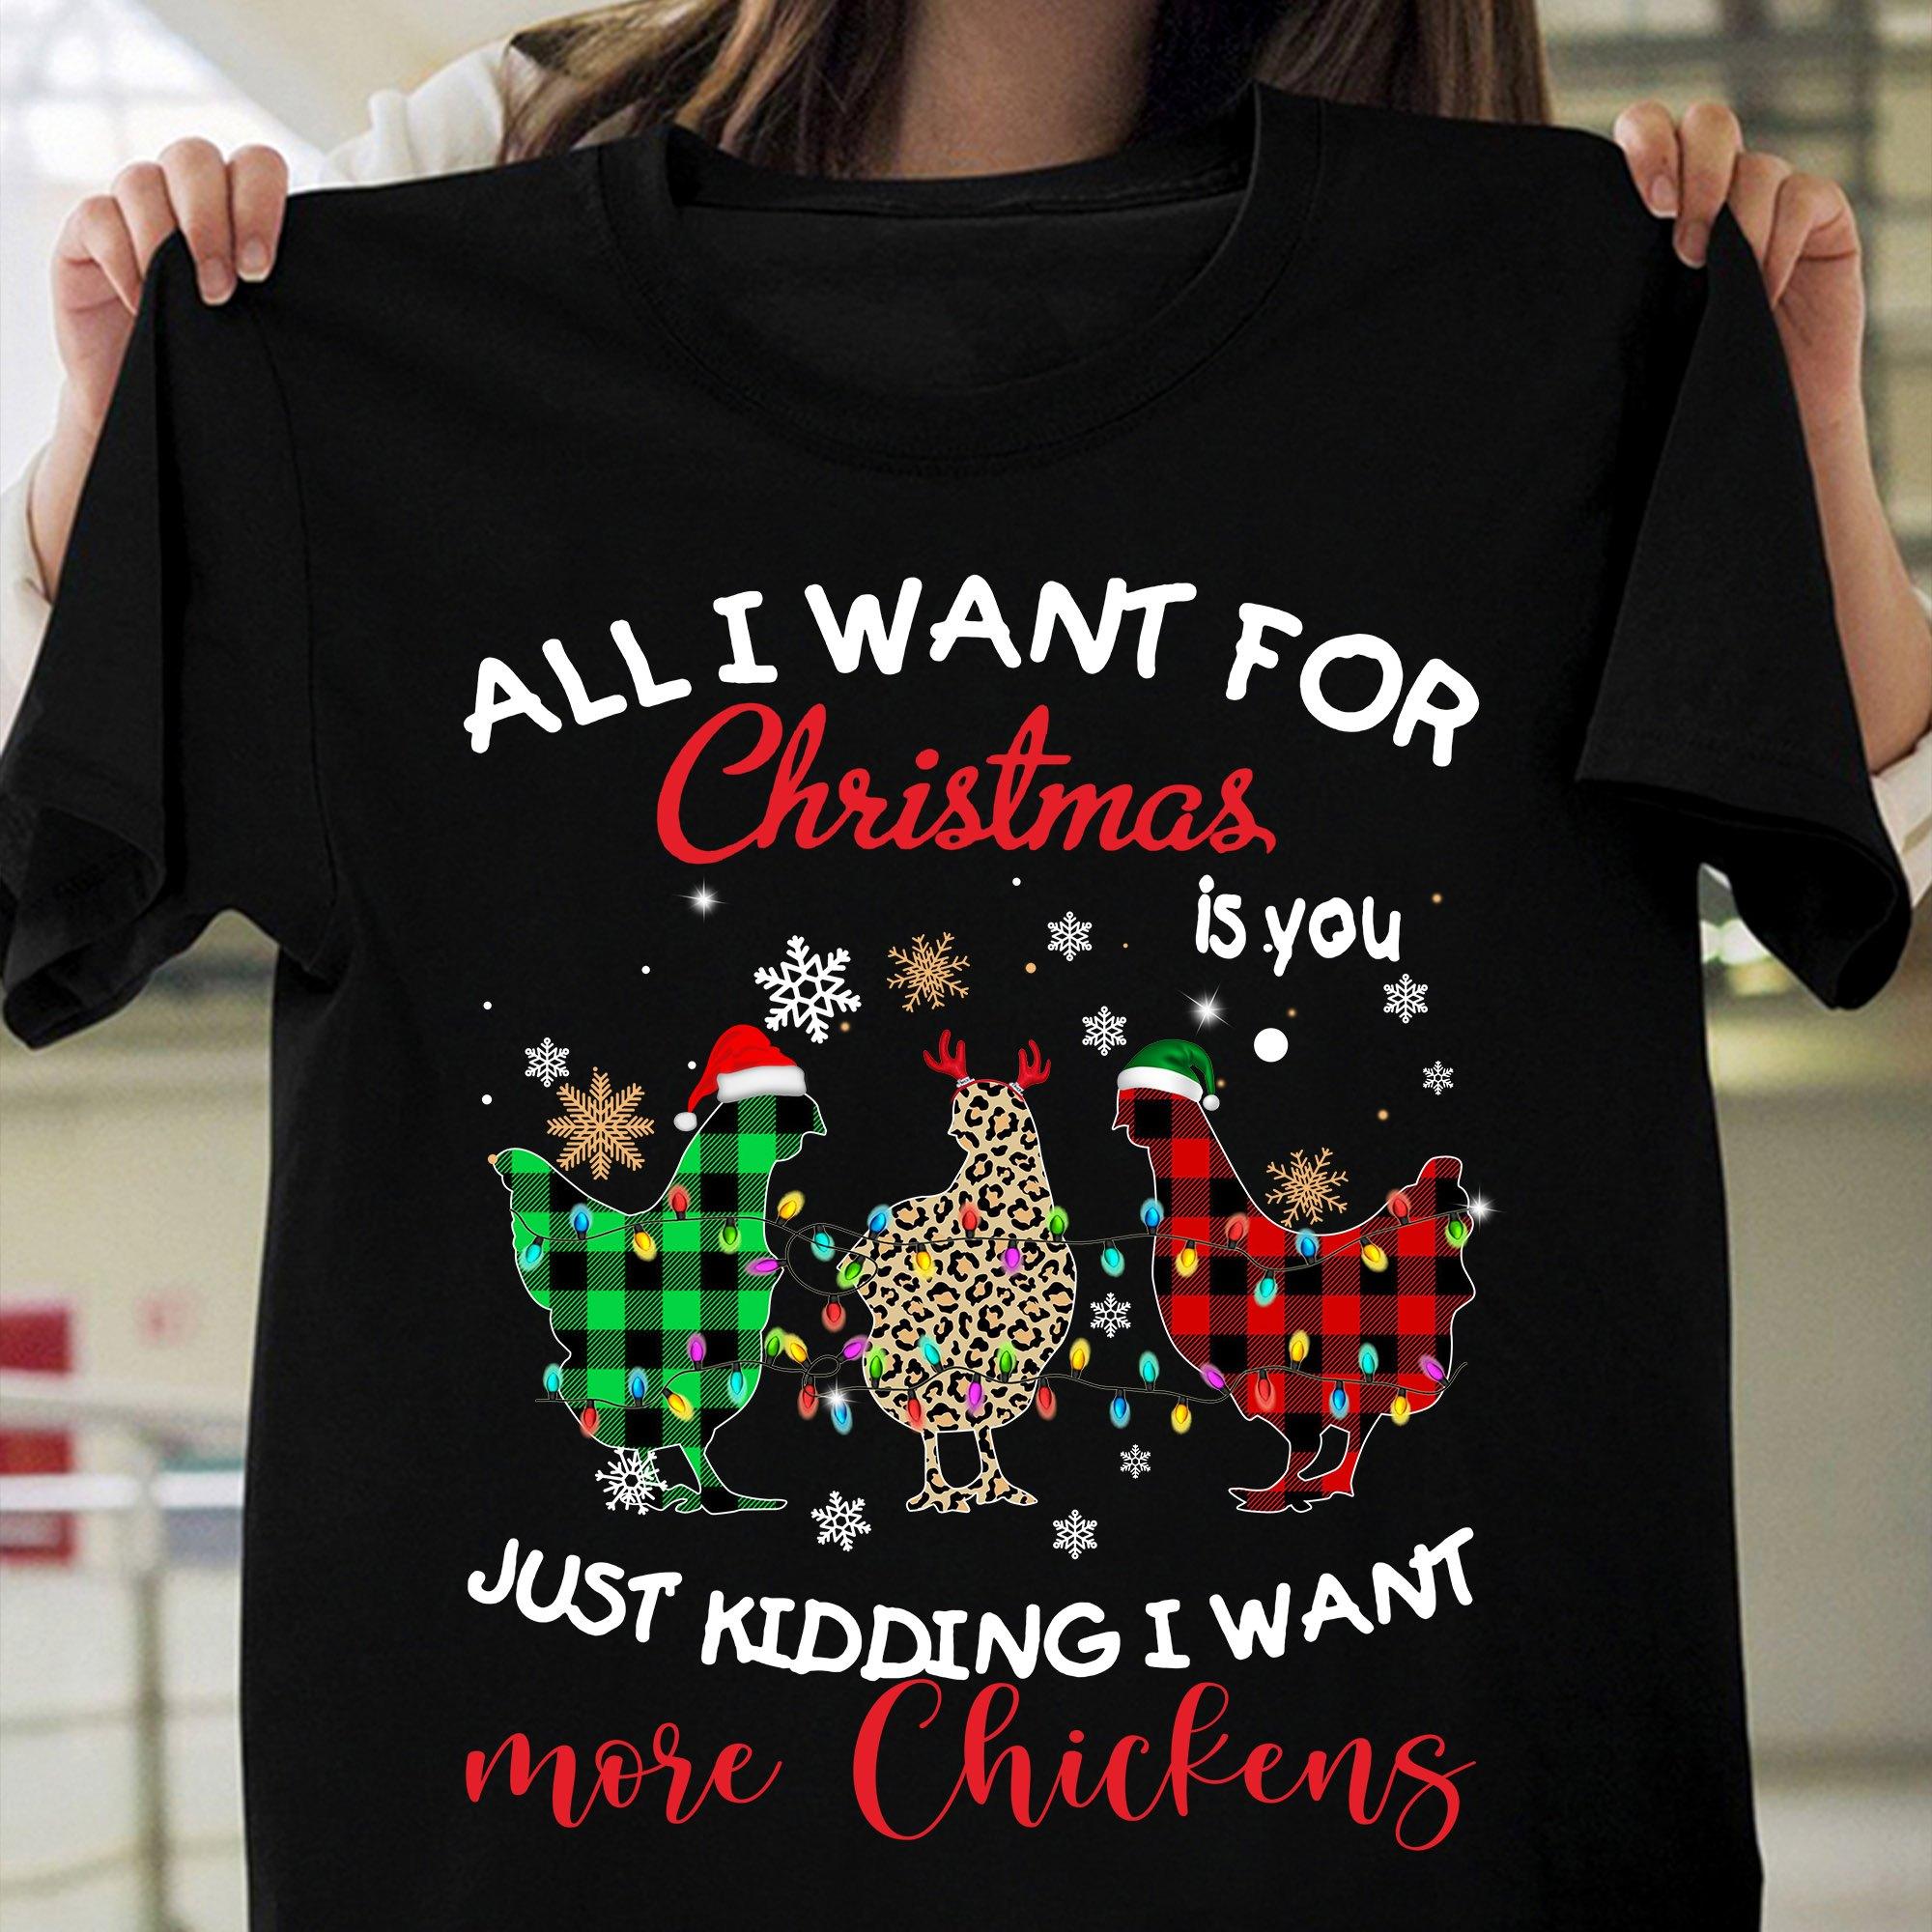 Christmas Chicken Gift, Ugly Sweater - All i want for christmas is you just kidding i want more chickens